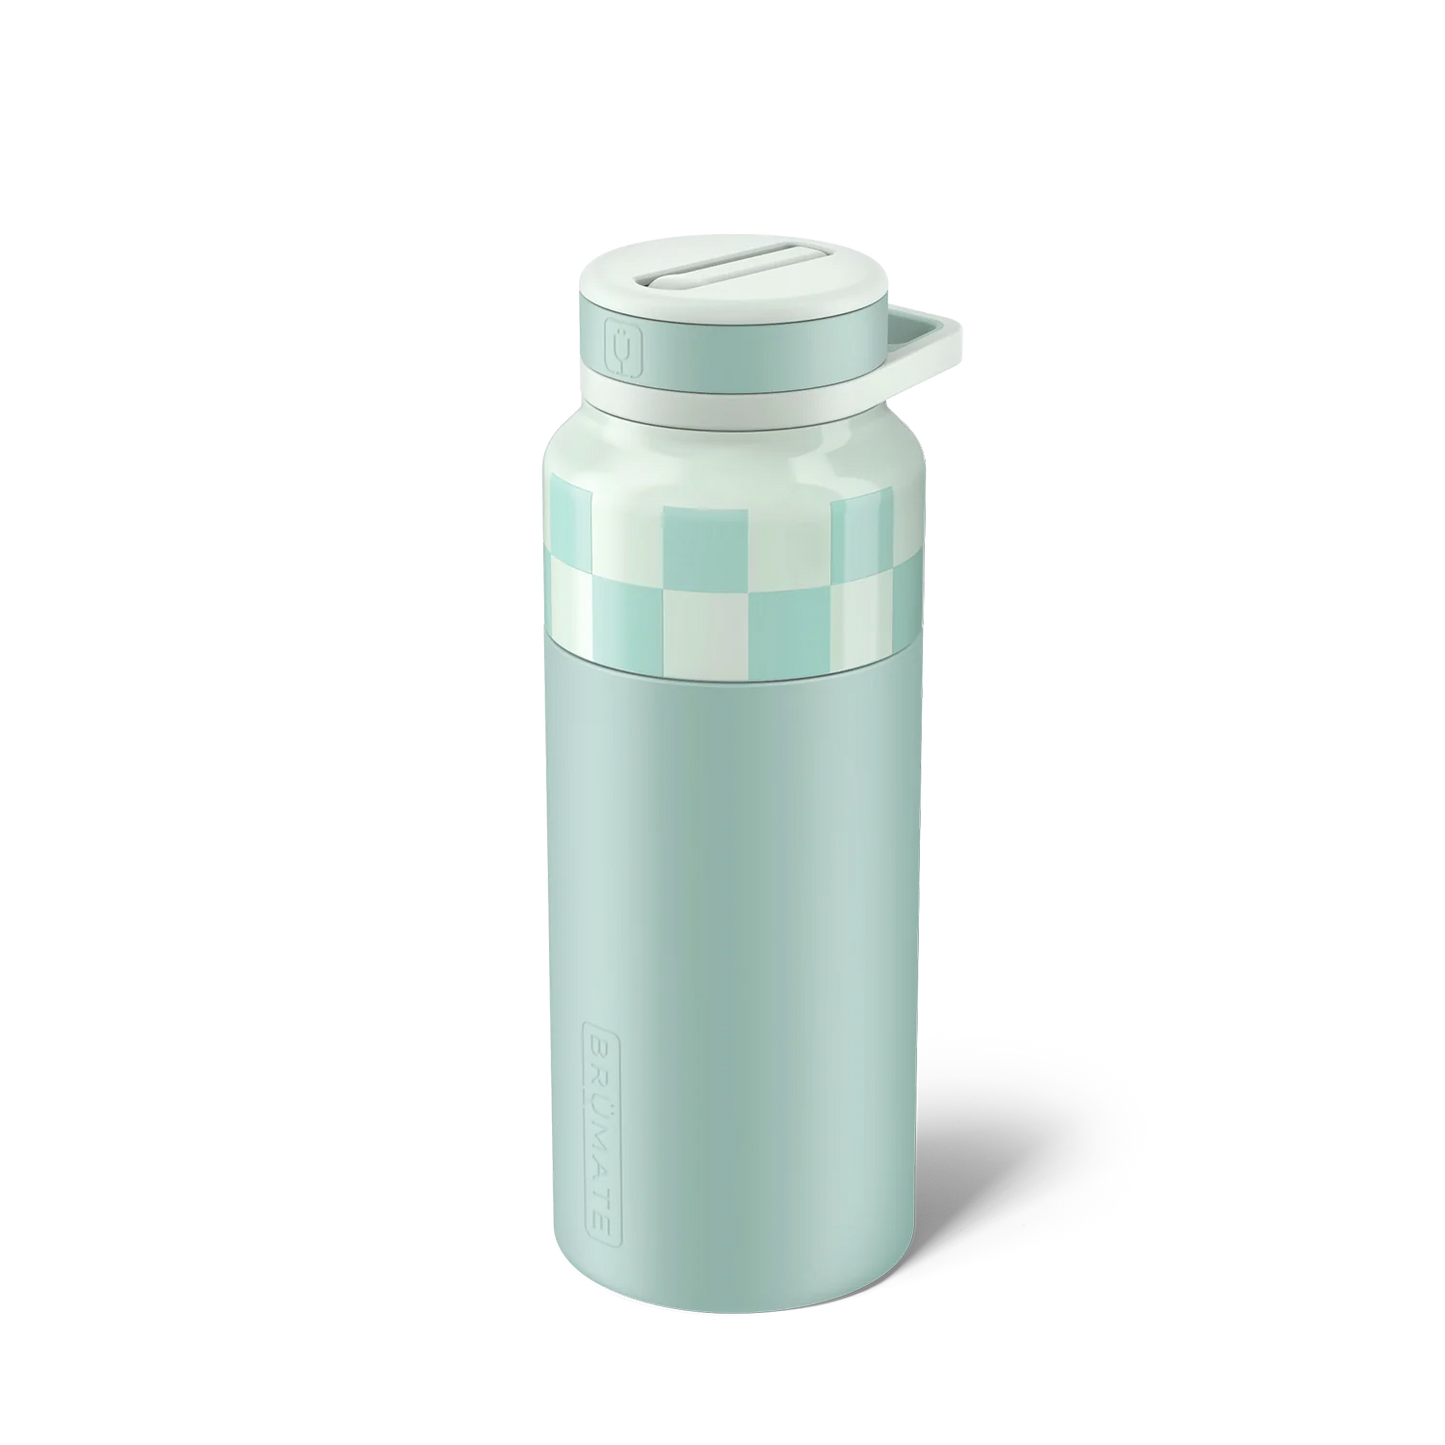 seafoam checker rotera water bottle on a white background.